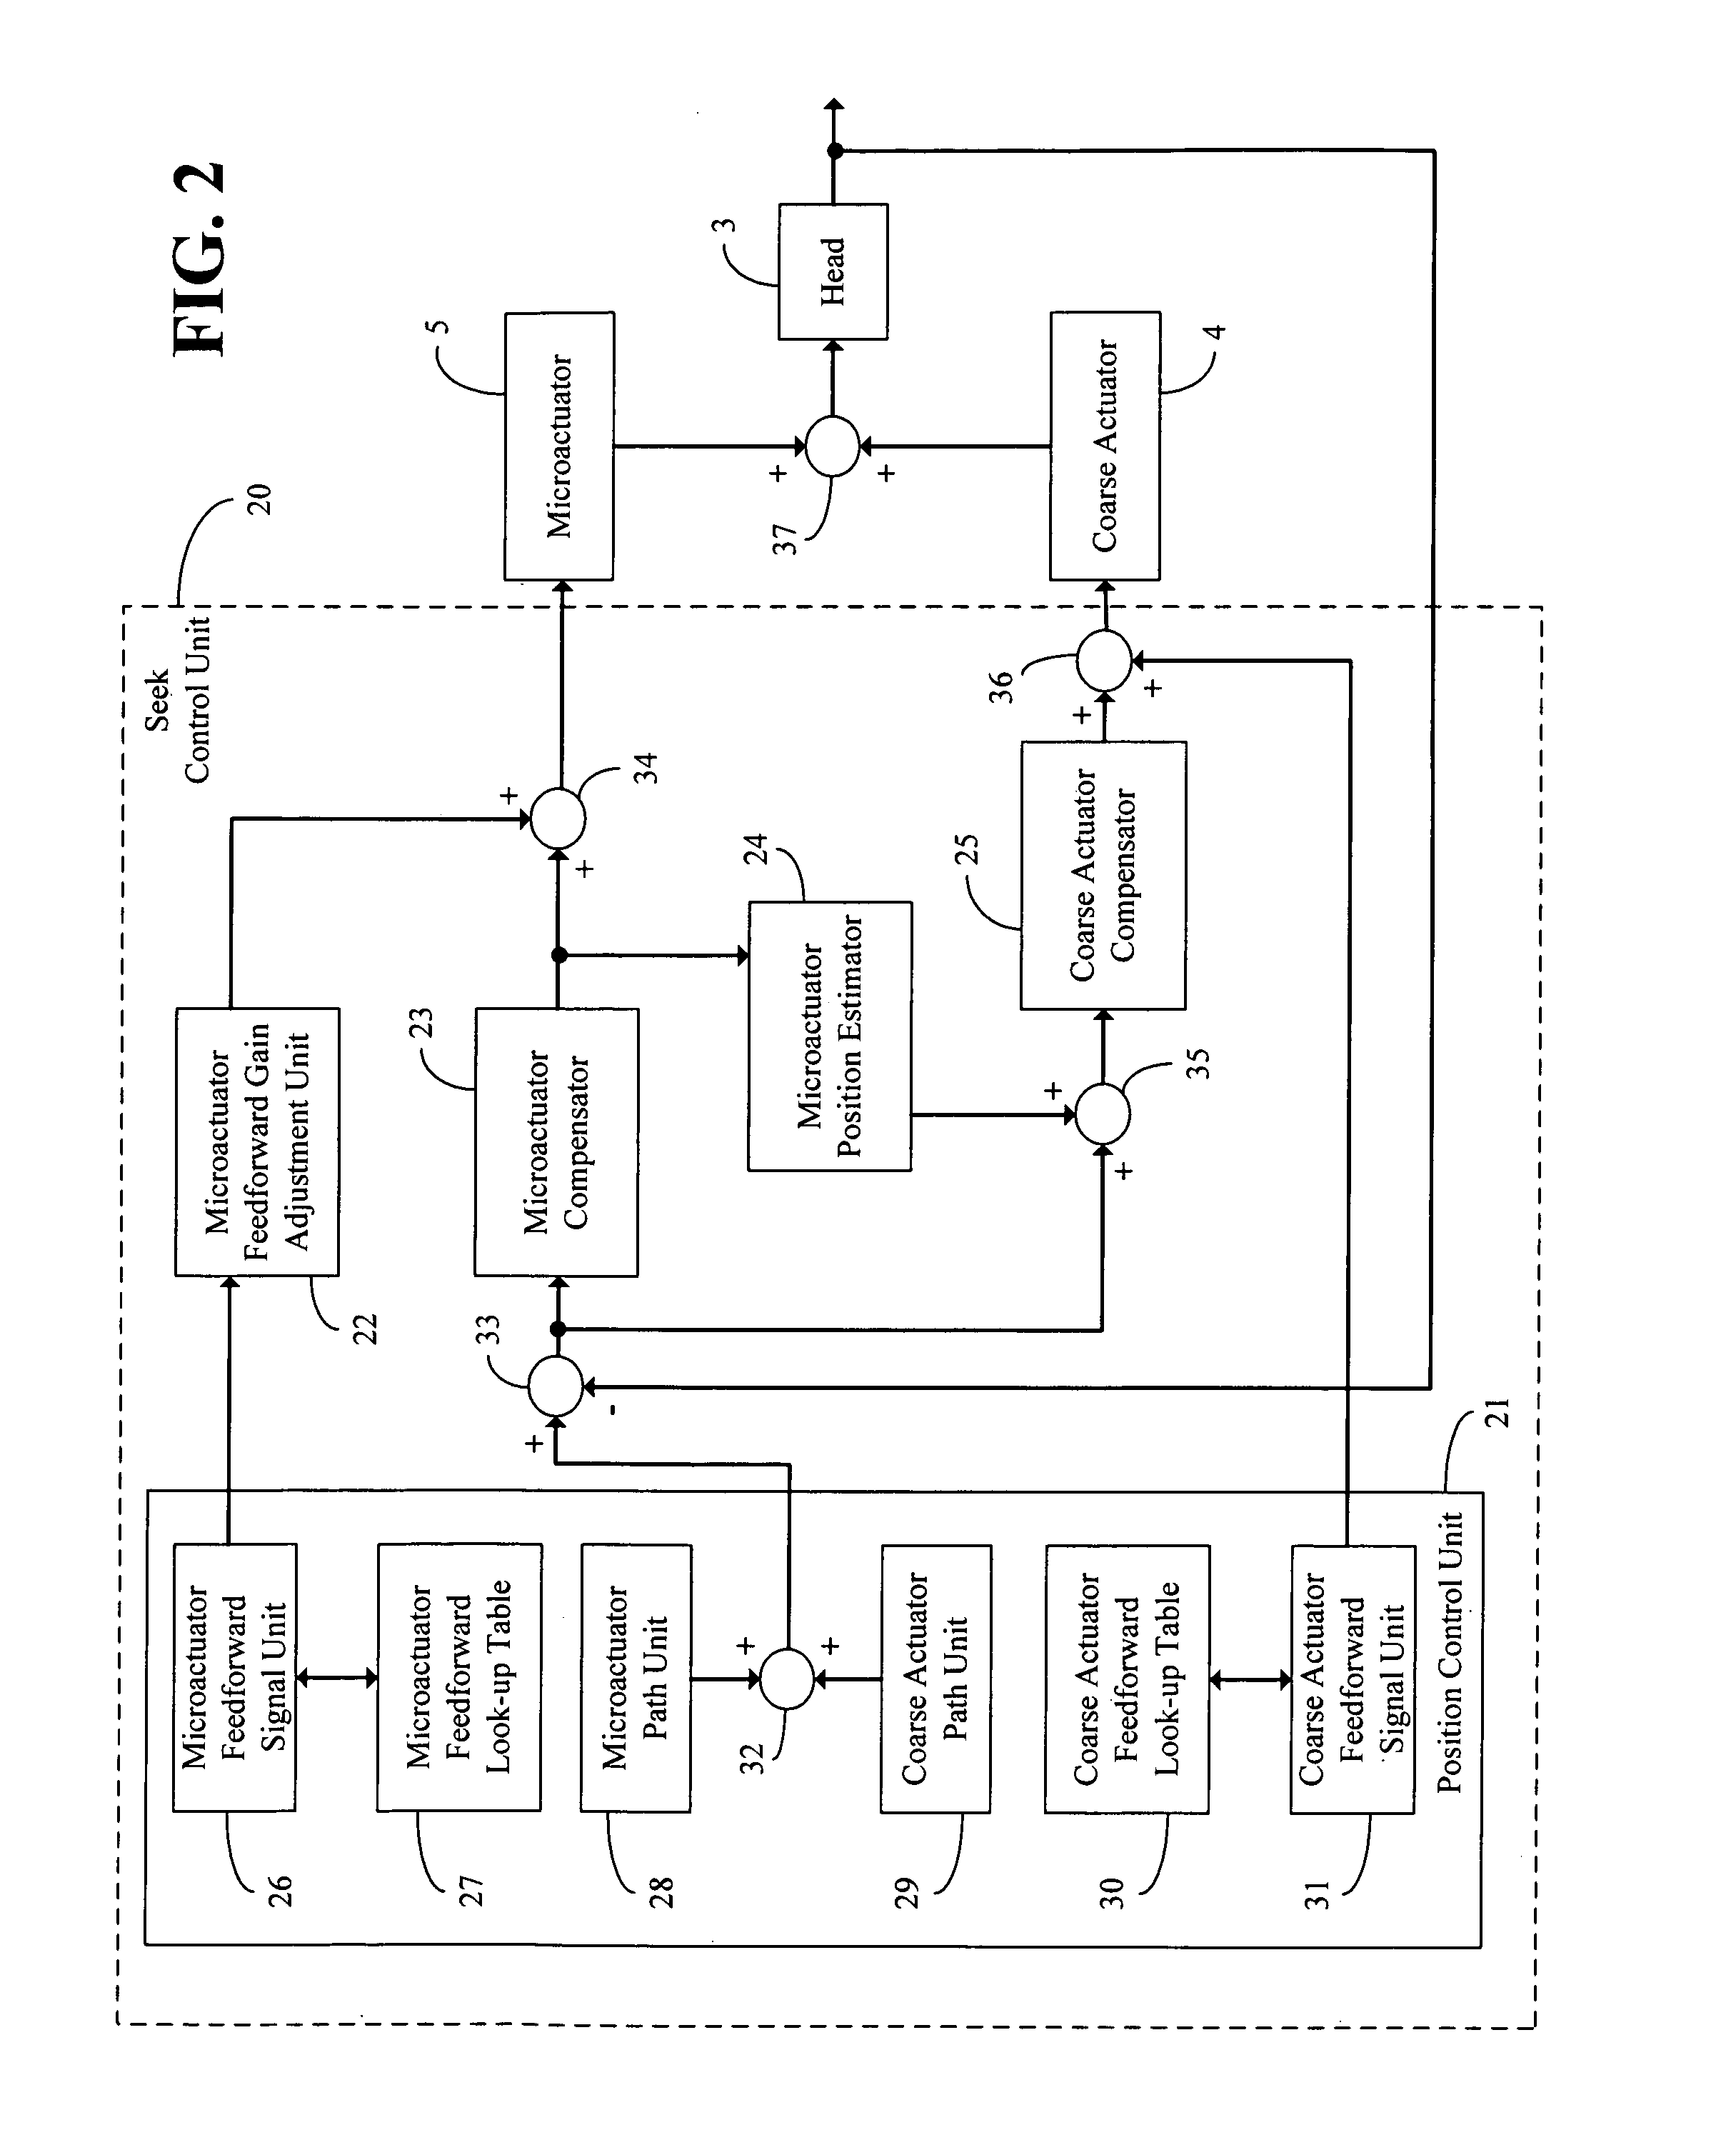 Disk drives and methods allowing for dual stage actuator adaptive seek control and microactuator gain calibration